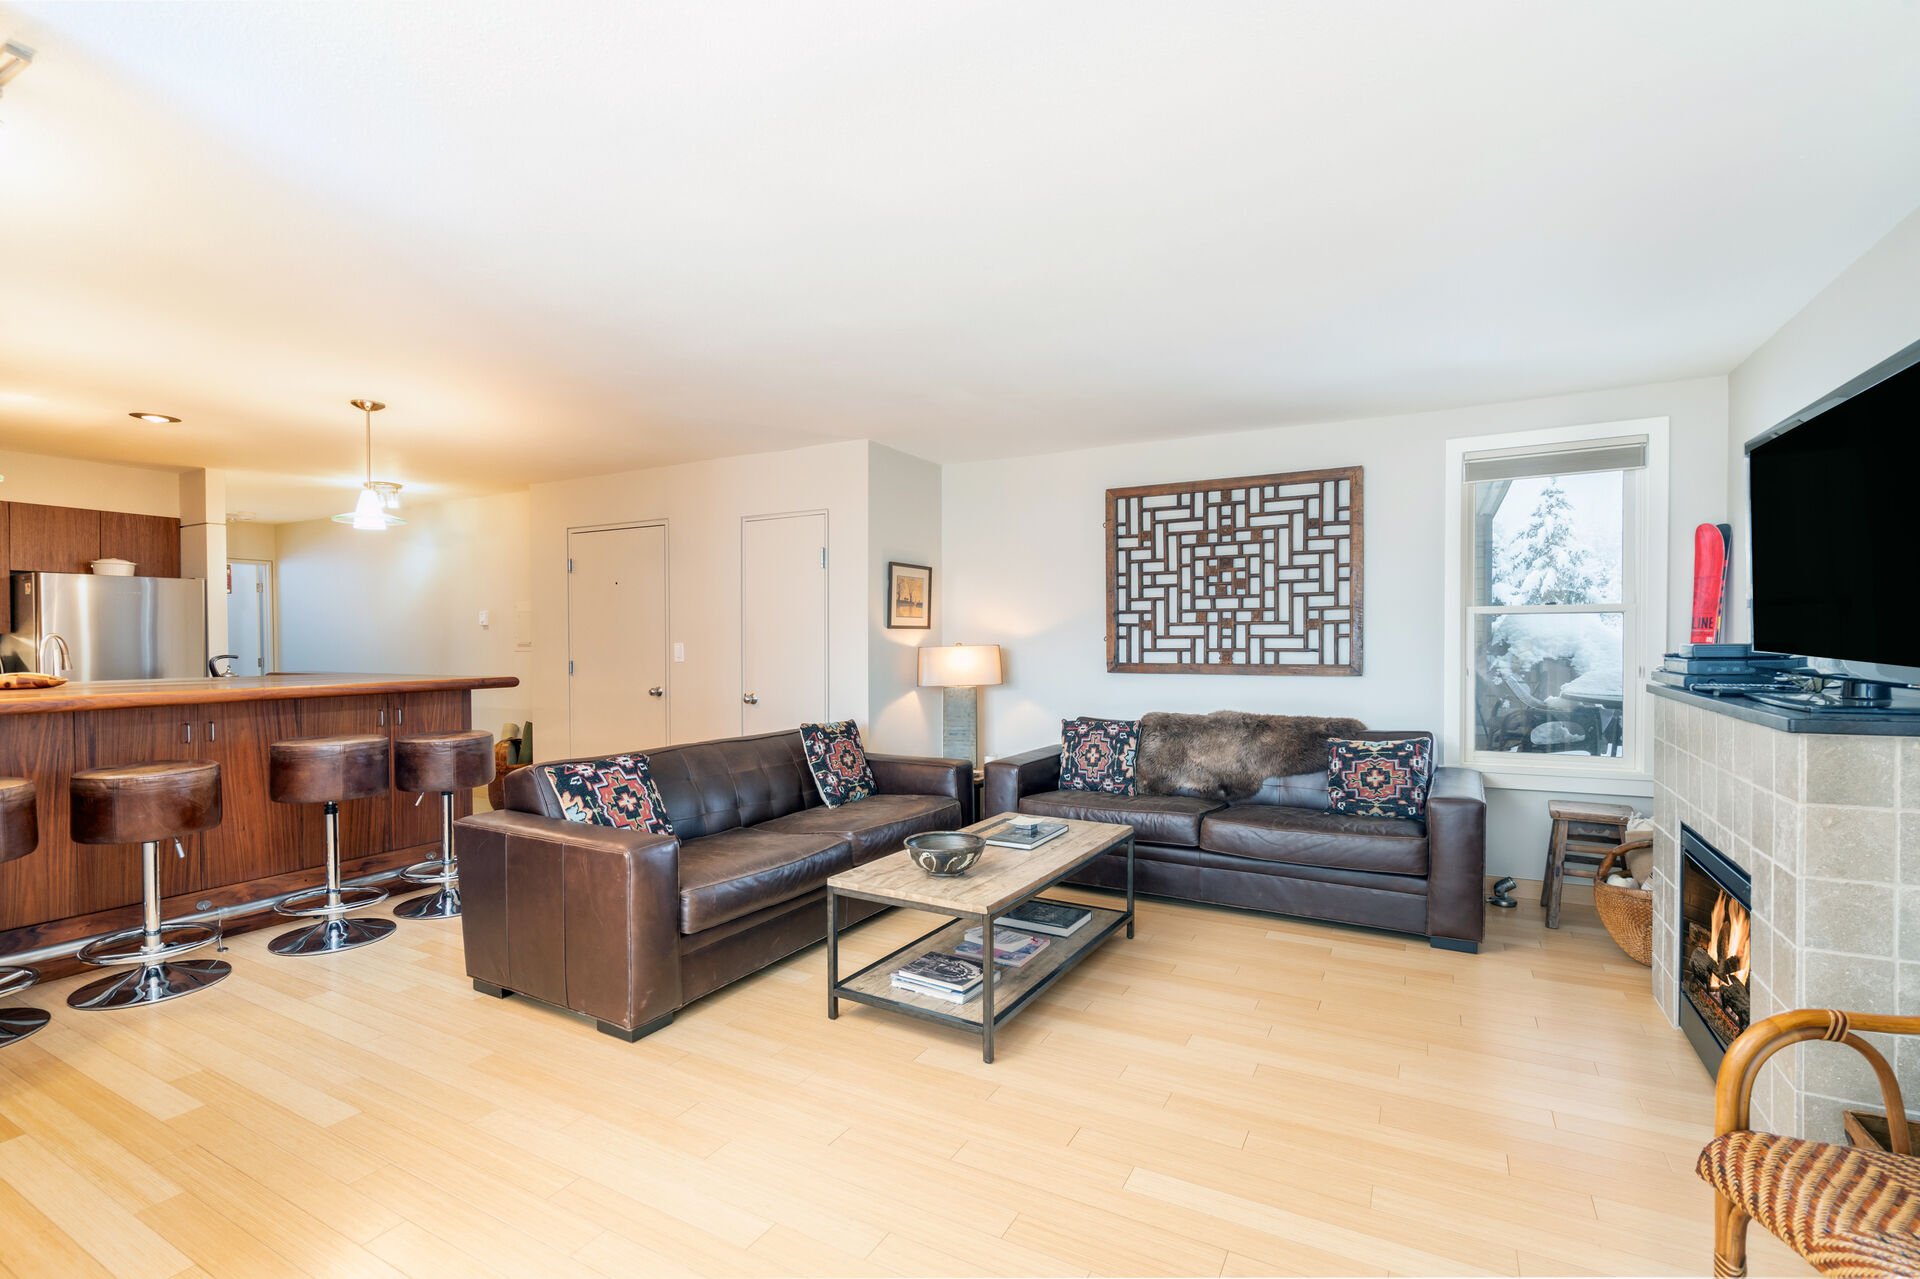 Living room with two couches and tv at this Telluride condo for rent.